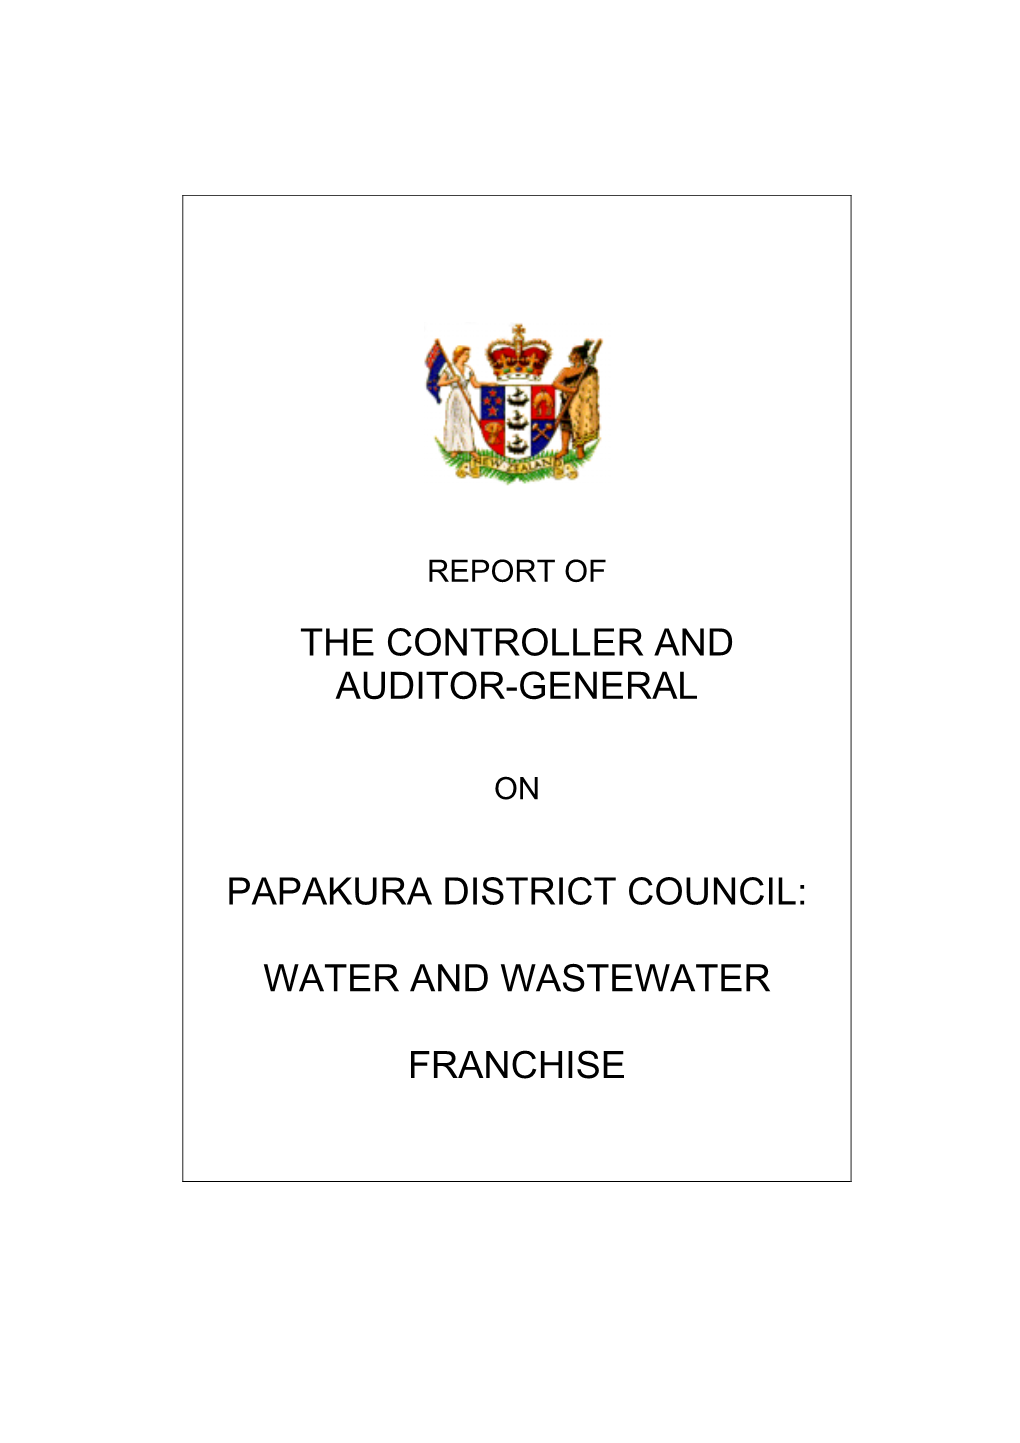 Papakura District Council: Water and Wastewater